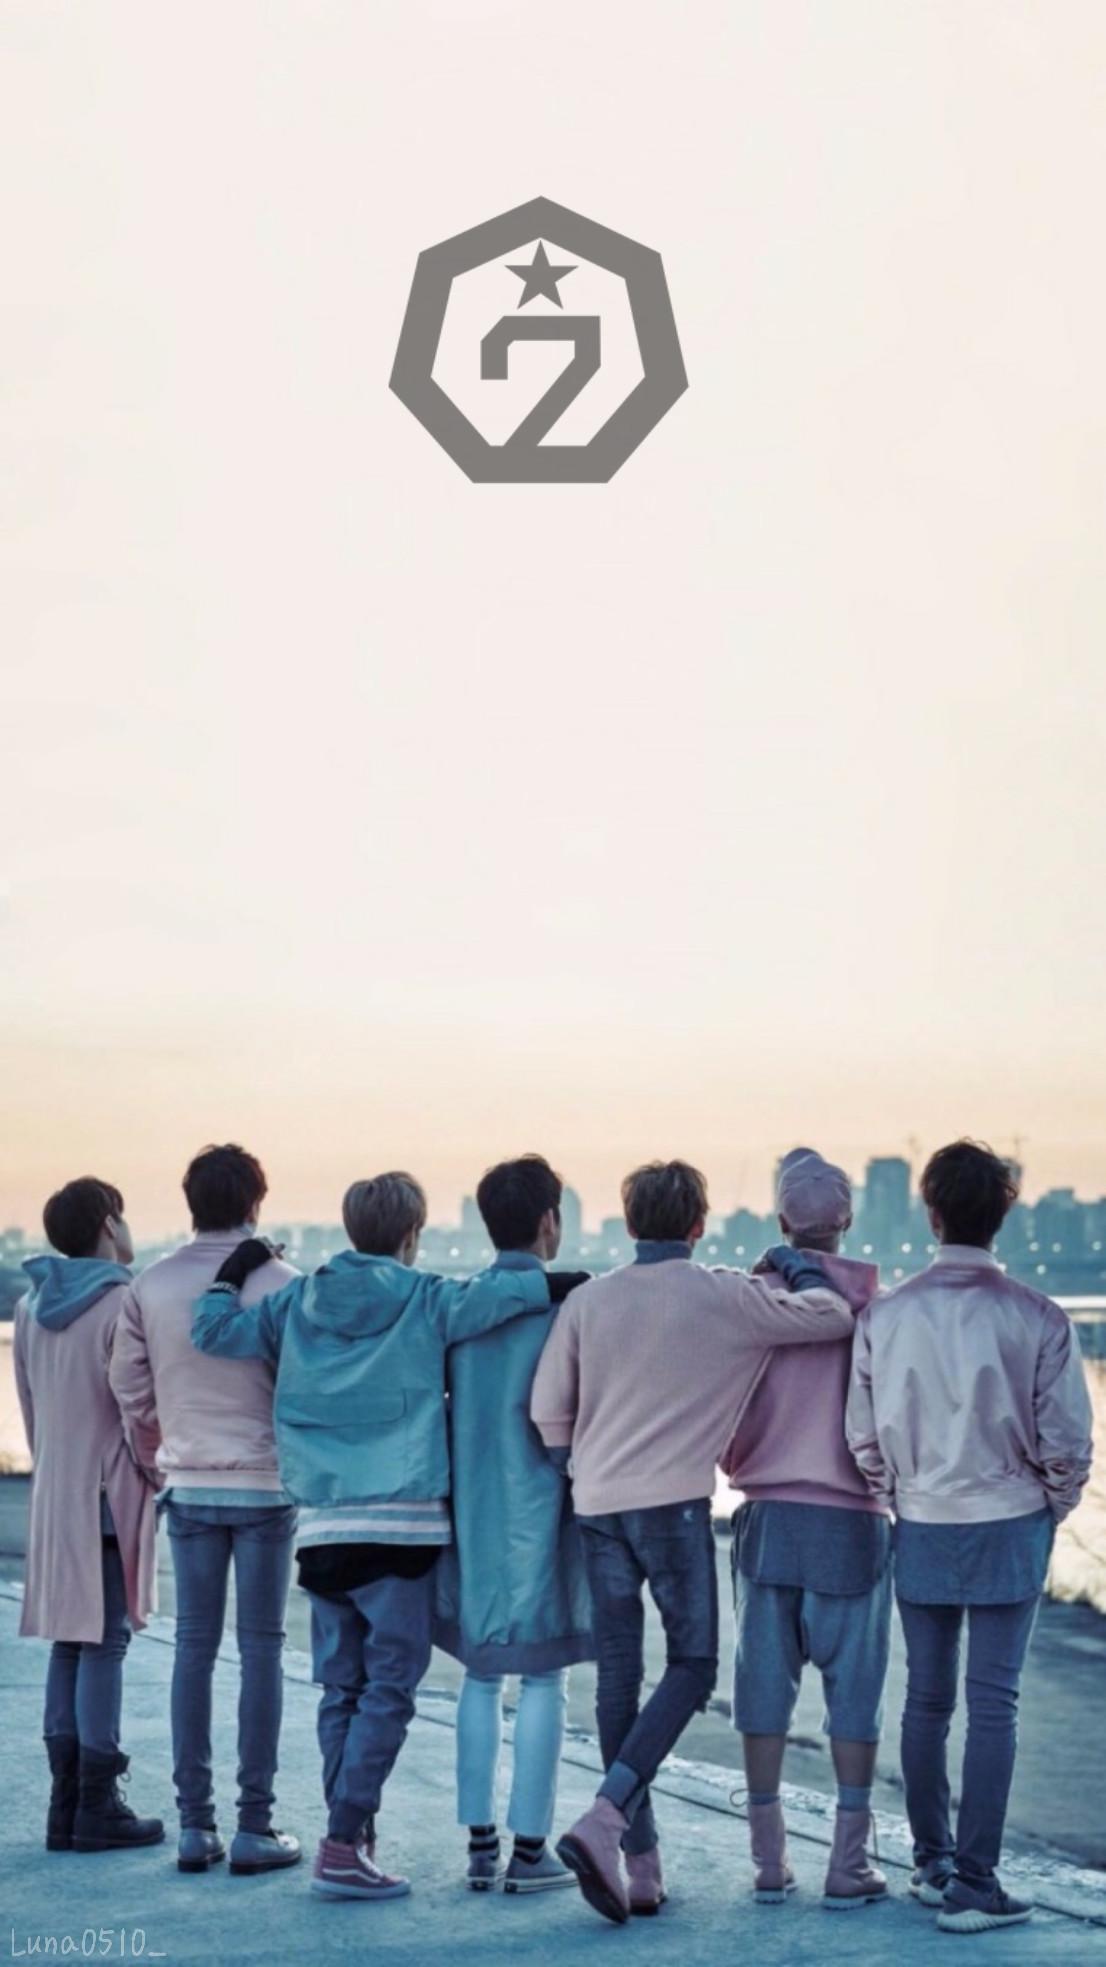 Got7 Wallpaper background picture